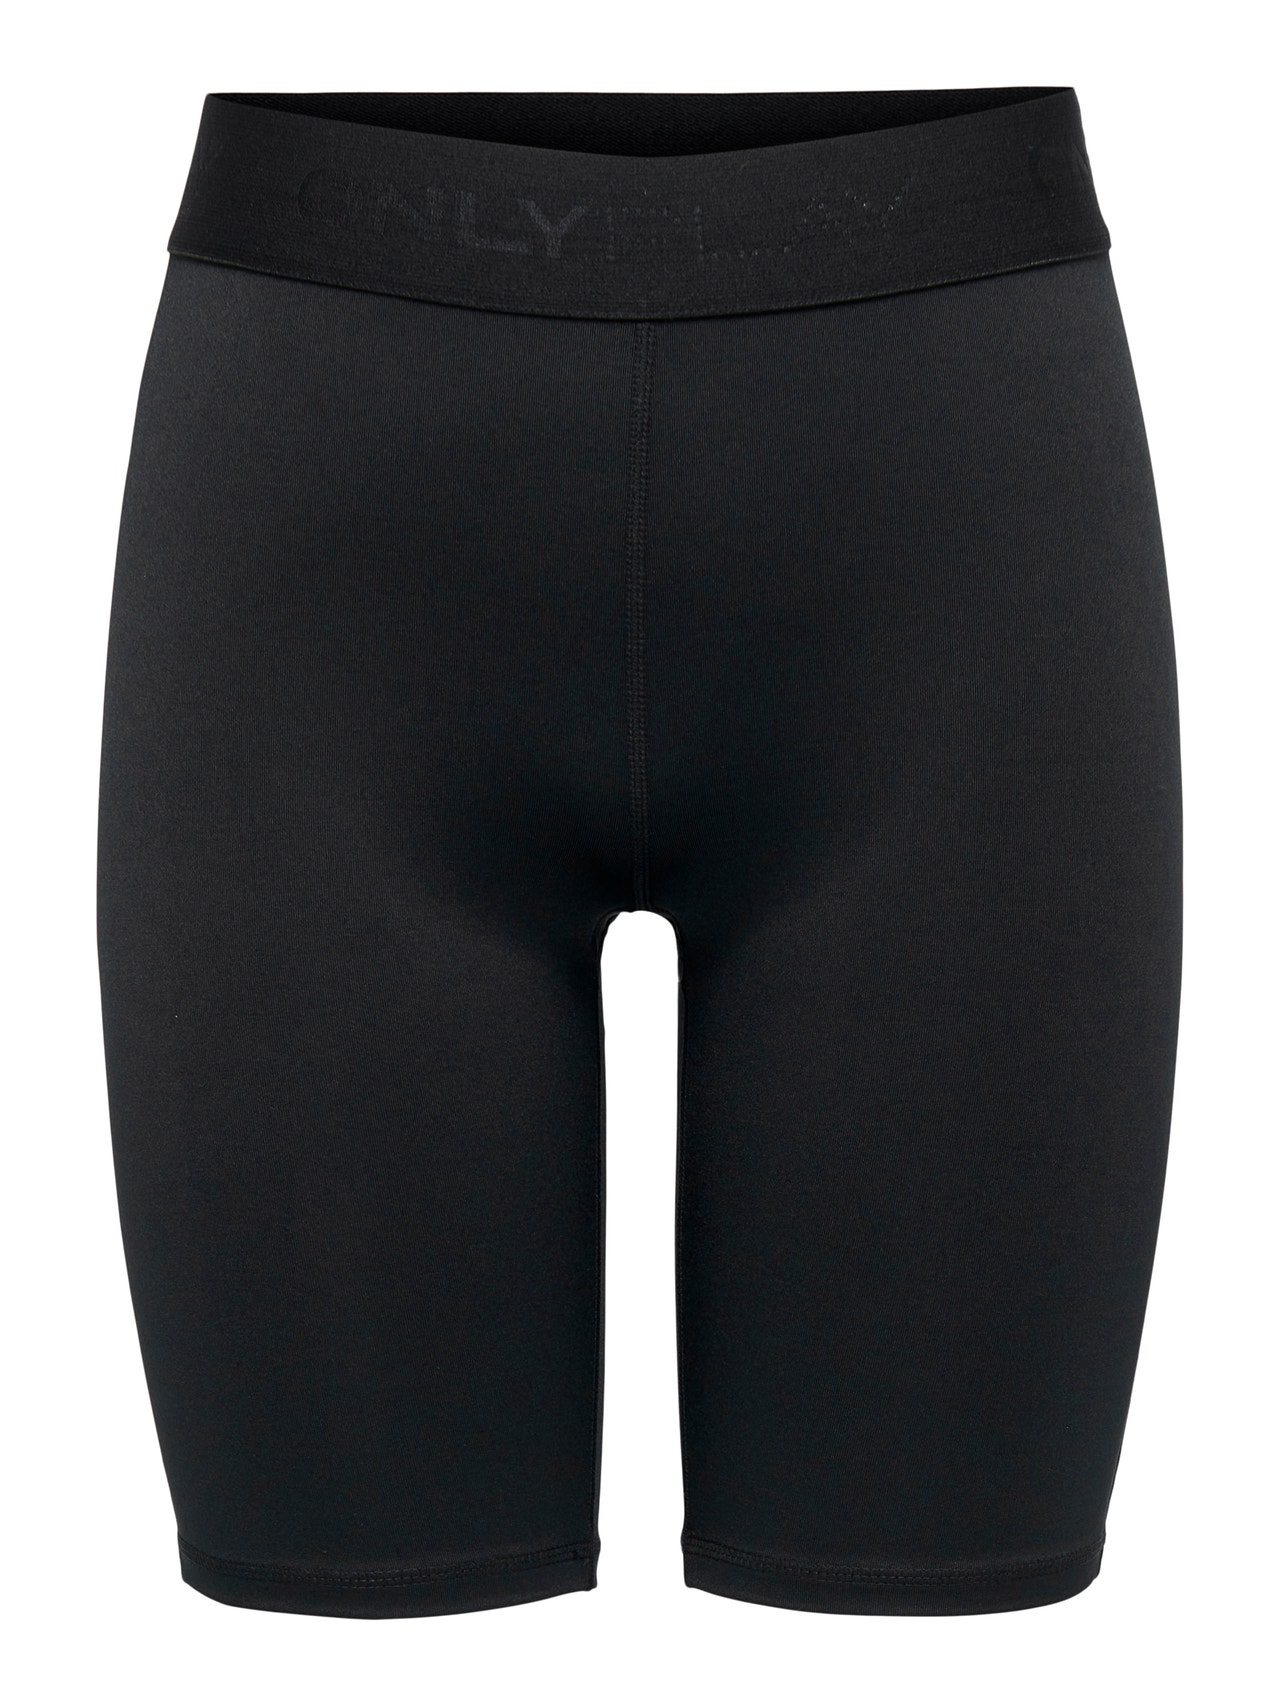 ONLY Tight fit Mid waist Shorts -Black - 15287822